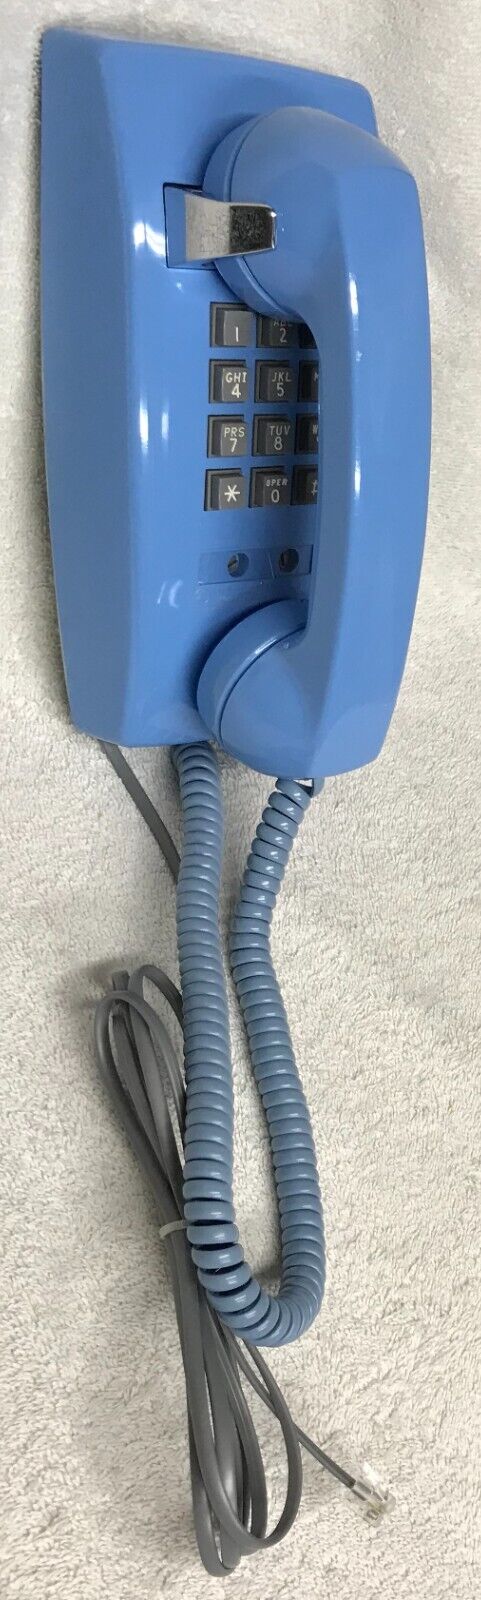 Vintage 1970s WESTERN ELECTRIC 2554BM BLUE Push Button Dial Wall Mount Telephone